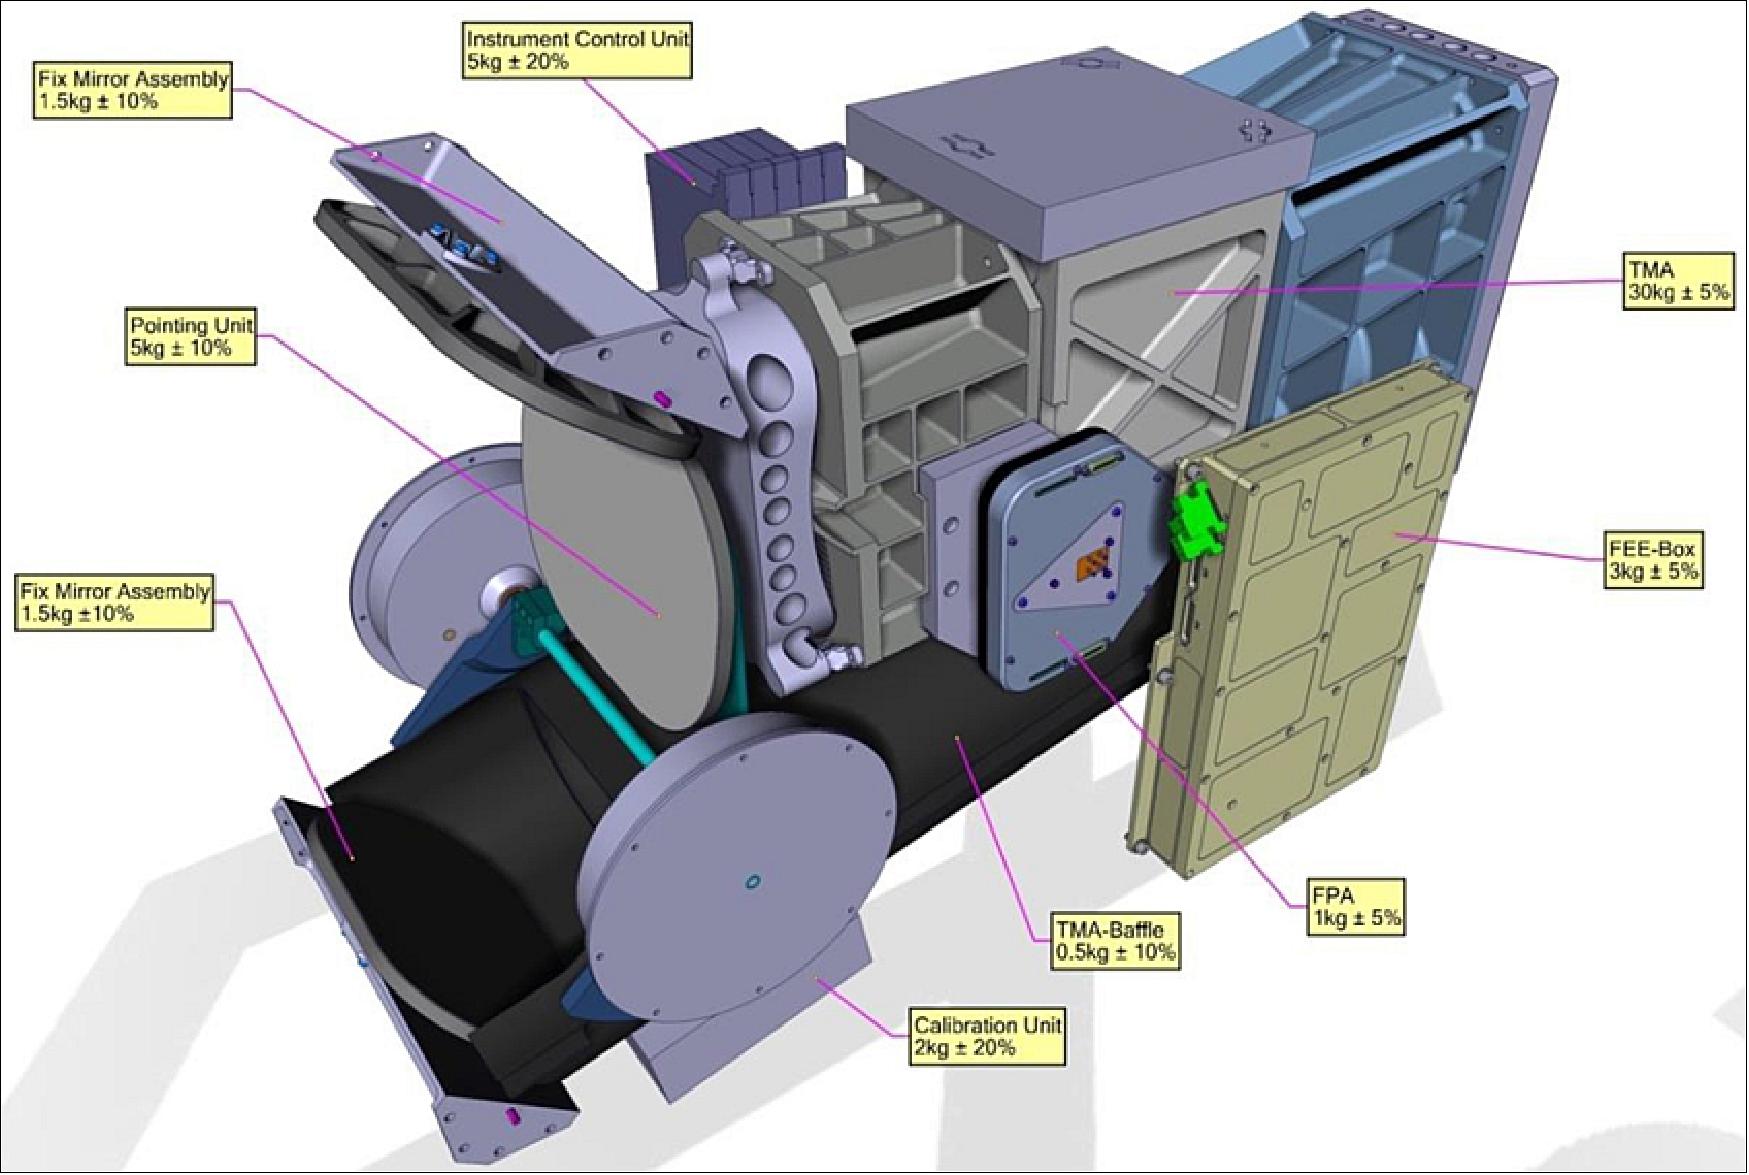 Figure 13: Illustration of the DESIS container instrument (image credit: DLR)